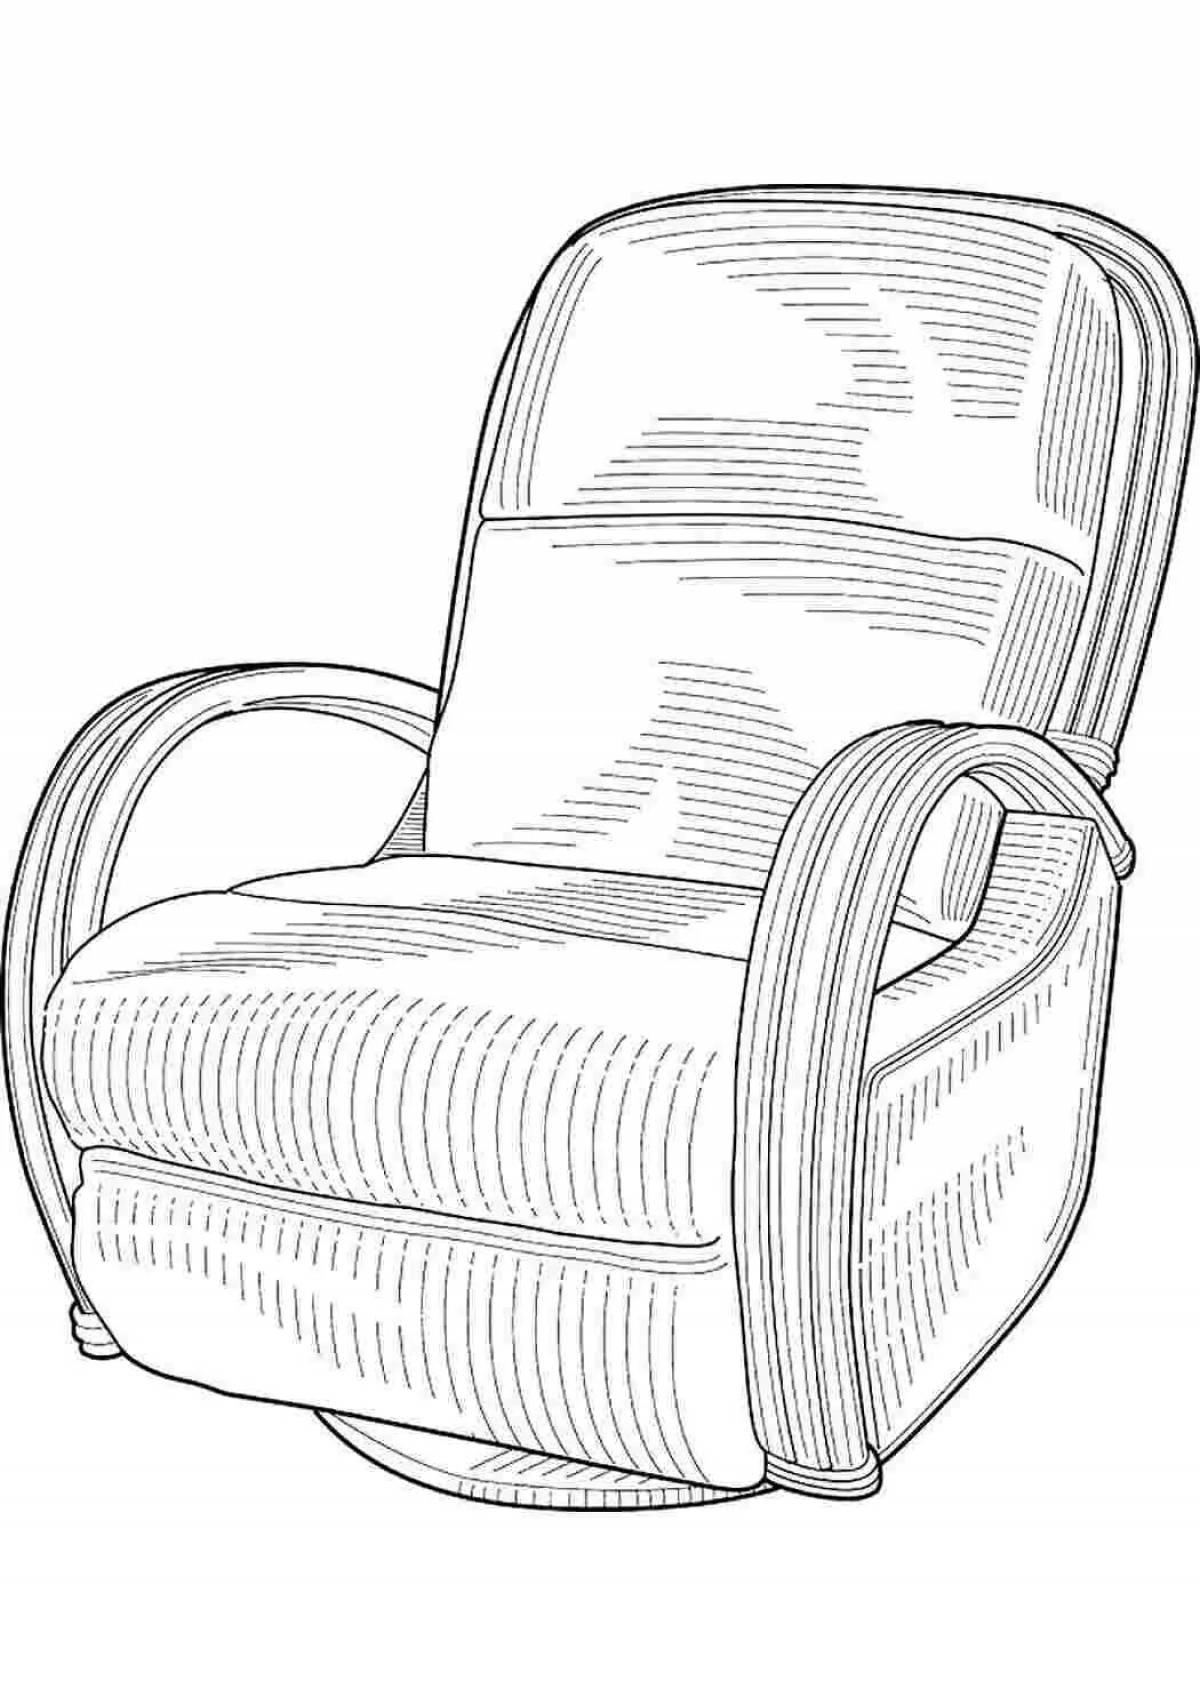 Coloring book elegant chair for children